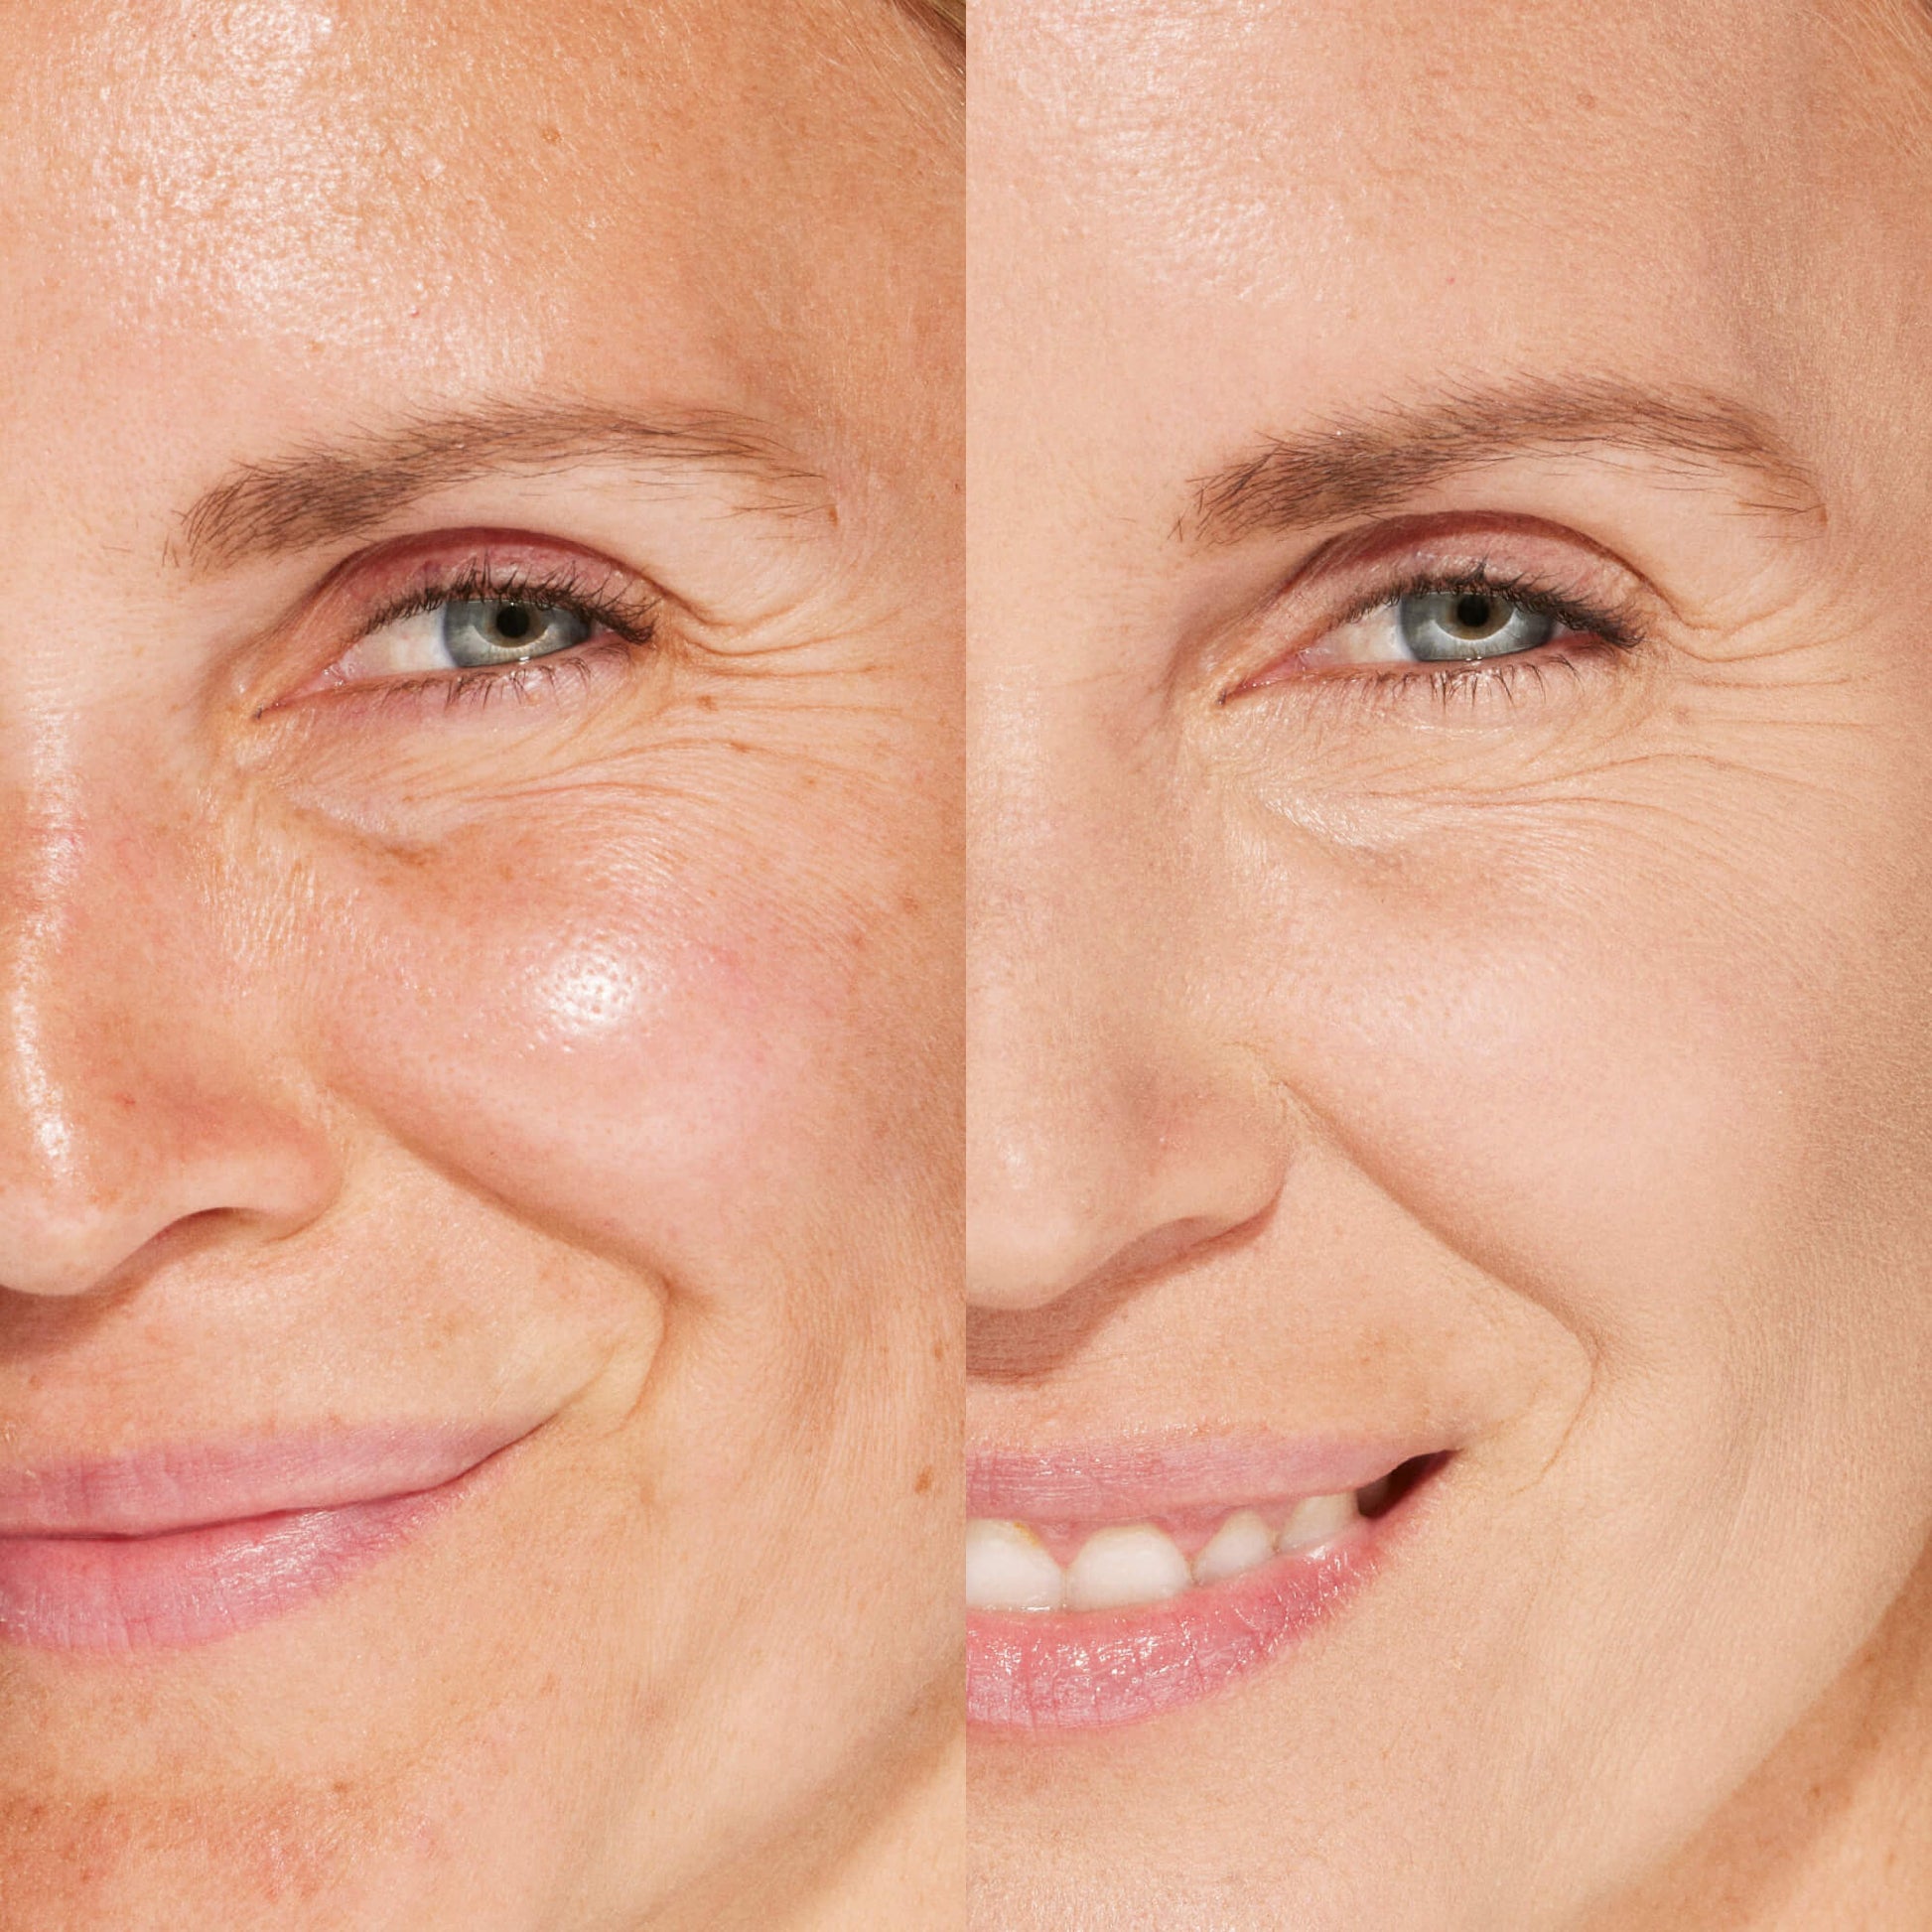 A person's face before and after using Tower 28 Beauty's Swipe Serum Concealer in shade 6.0 IE to cover up dark circles, blemishes, and discoloration